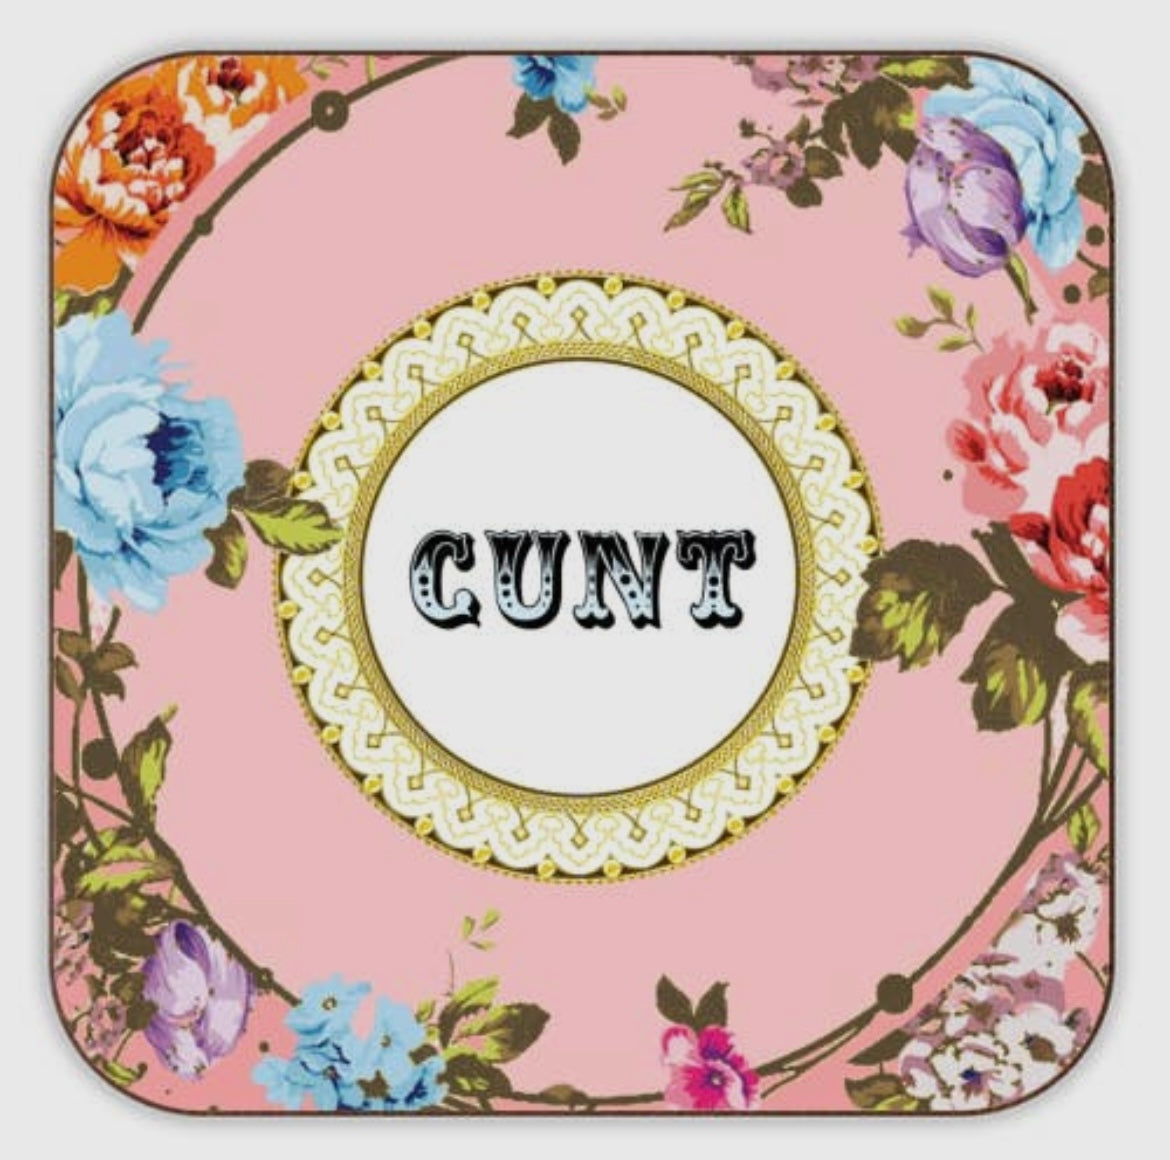 Cork Coaster - See You Next Tuesday - Pink By Wallace Elizabeth